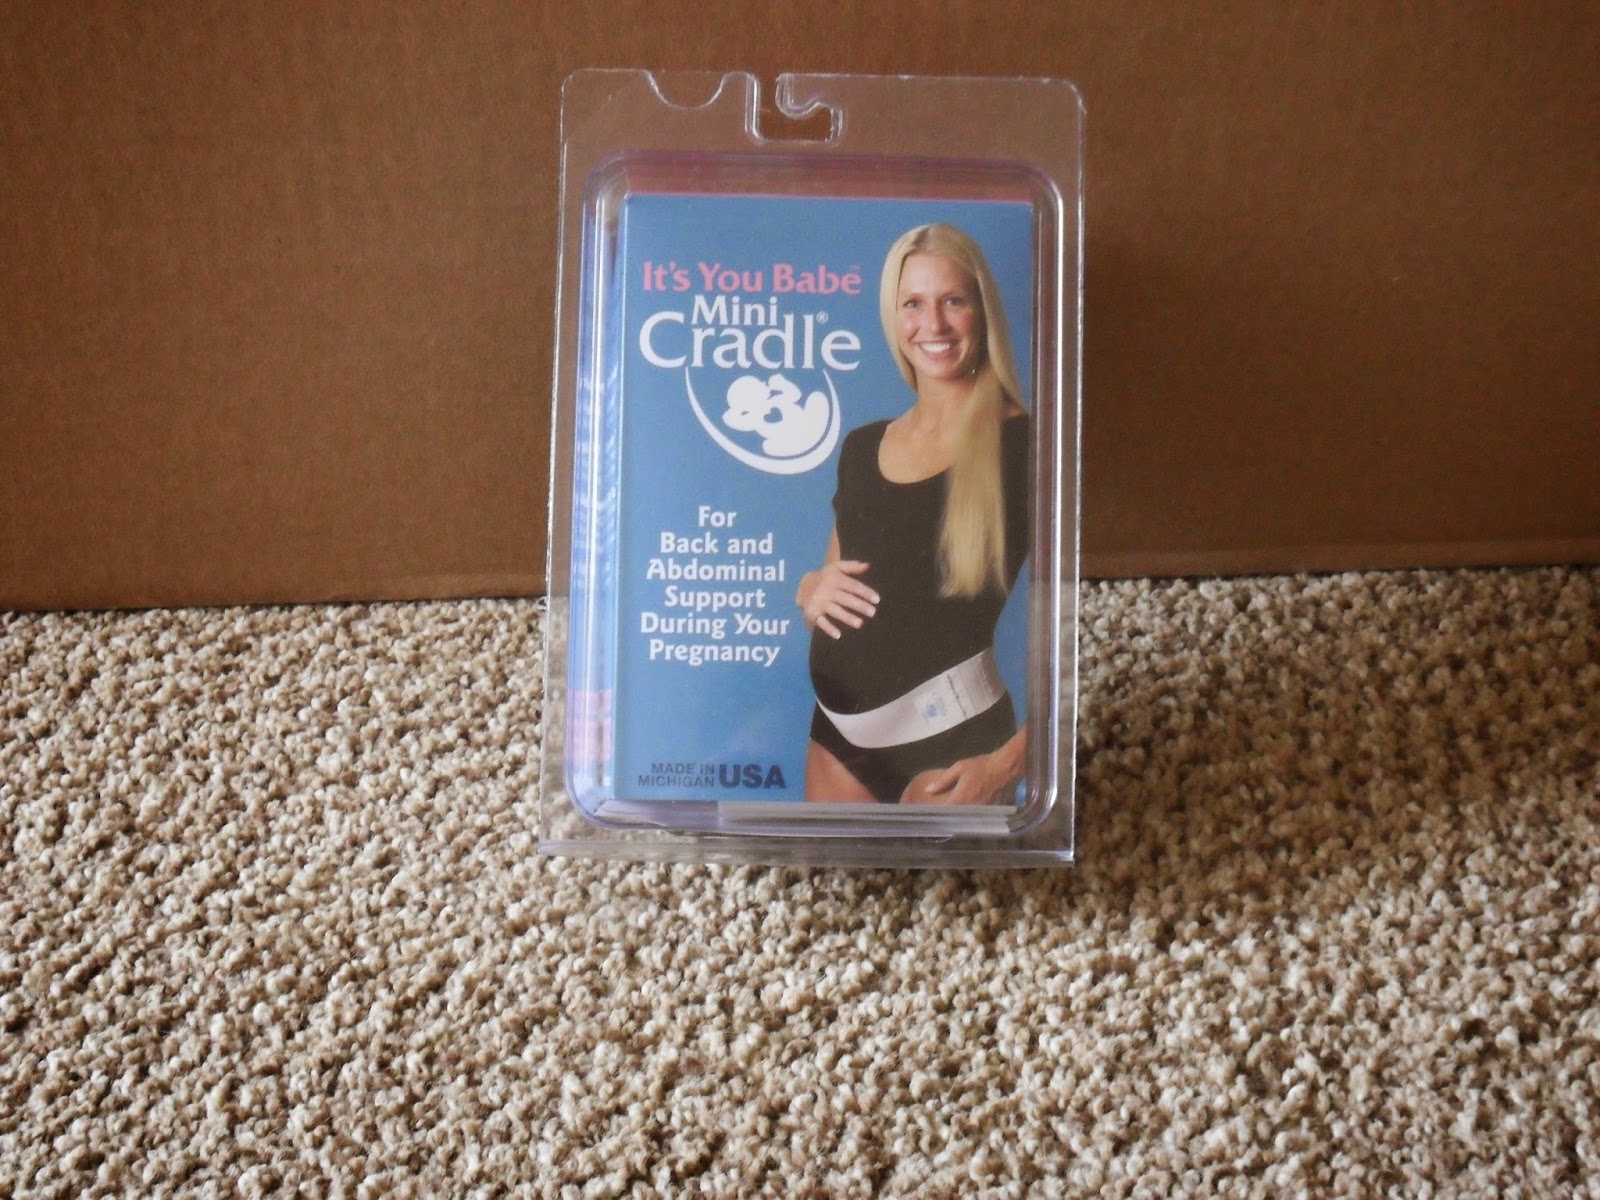 Pregnancy "ACHES" & It's You Babe, mini cradle.Review